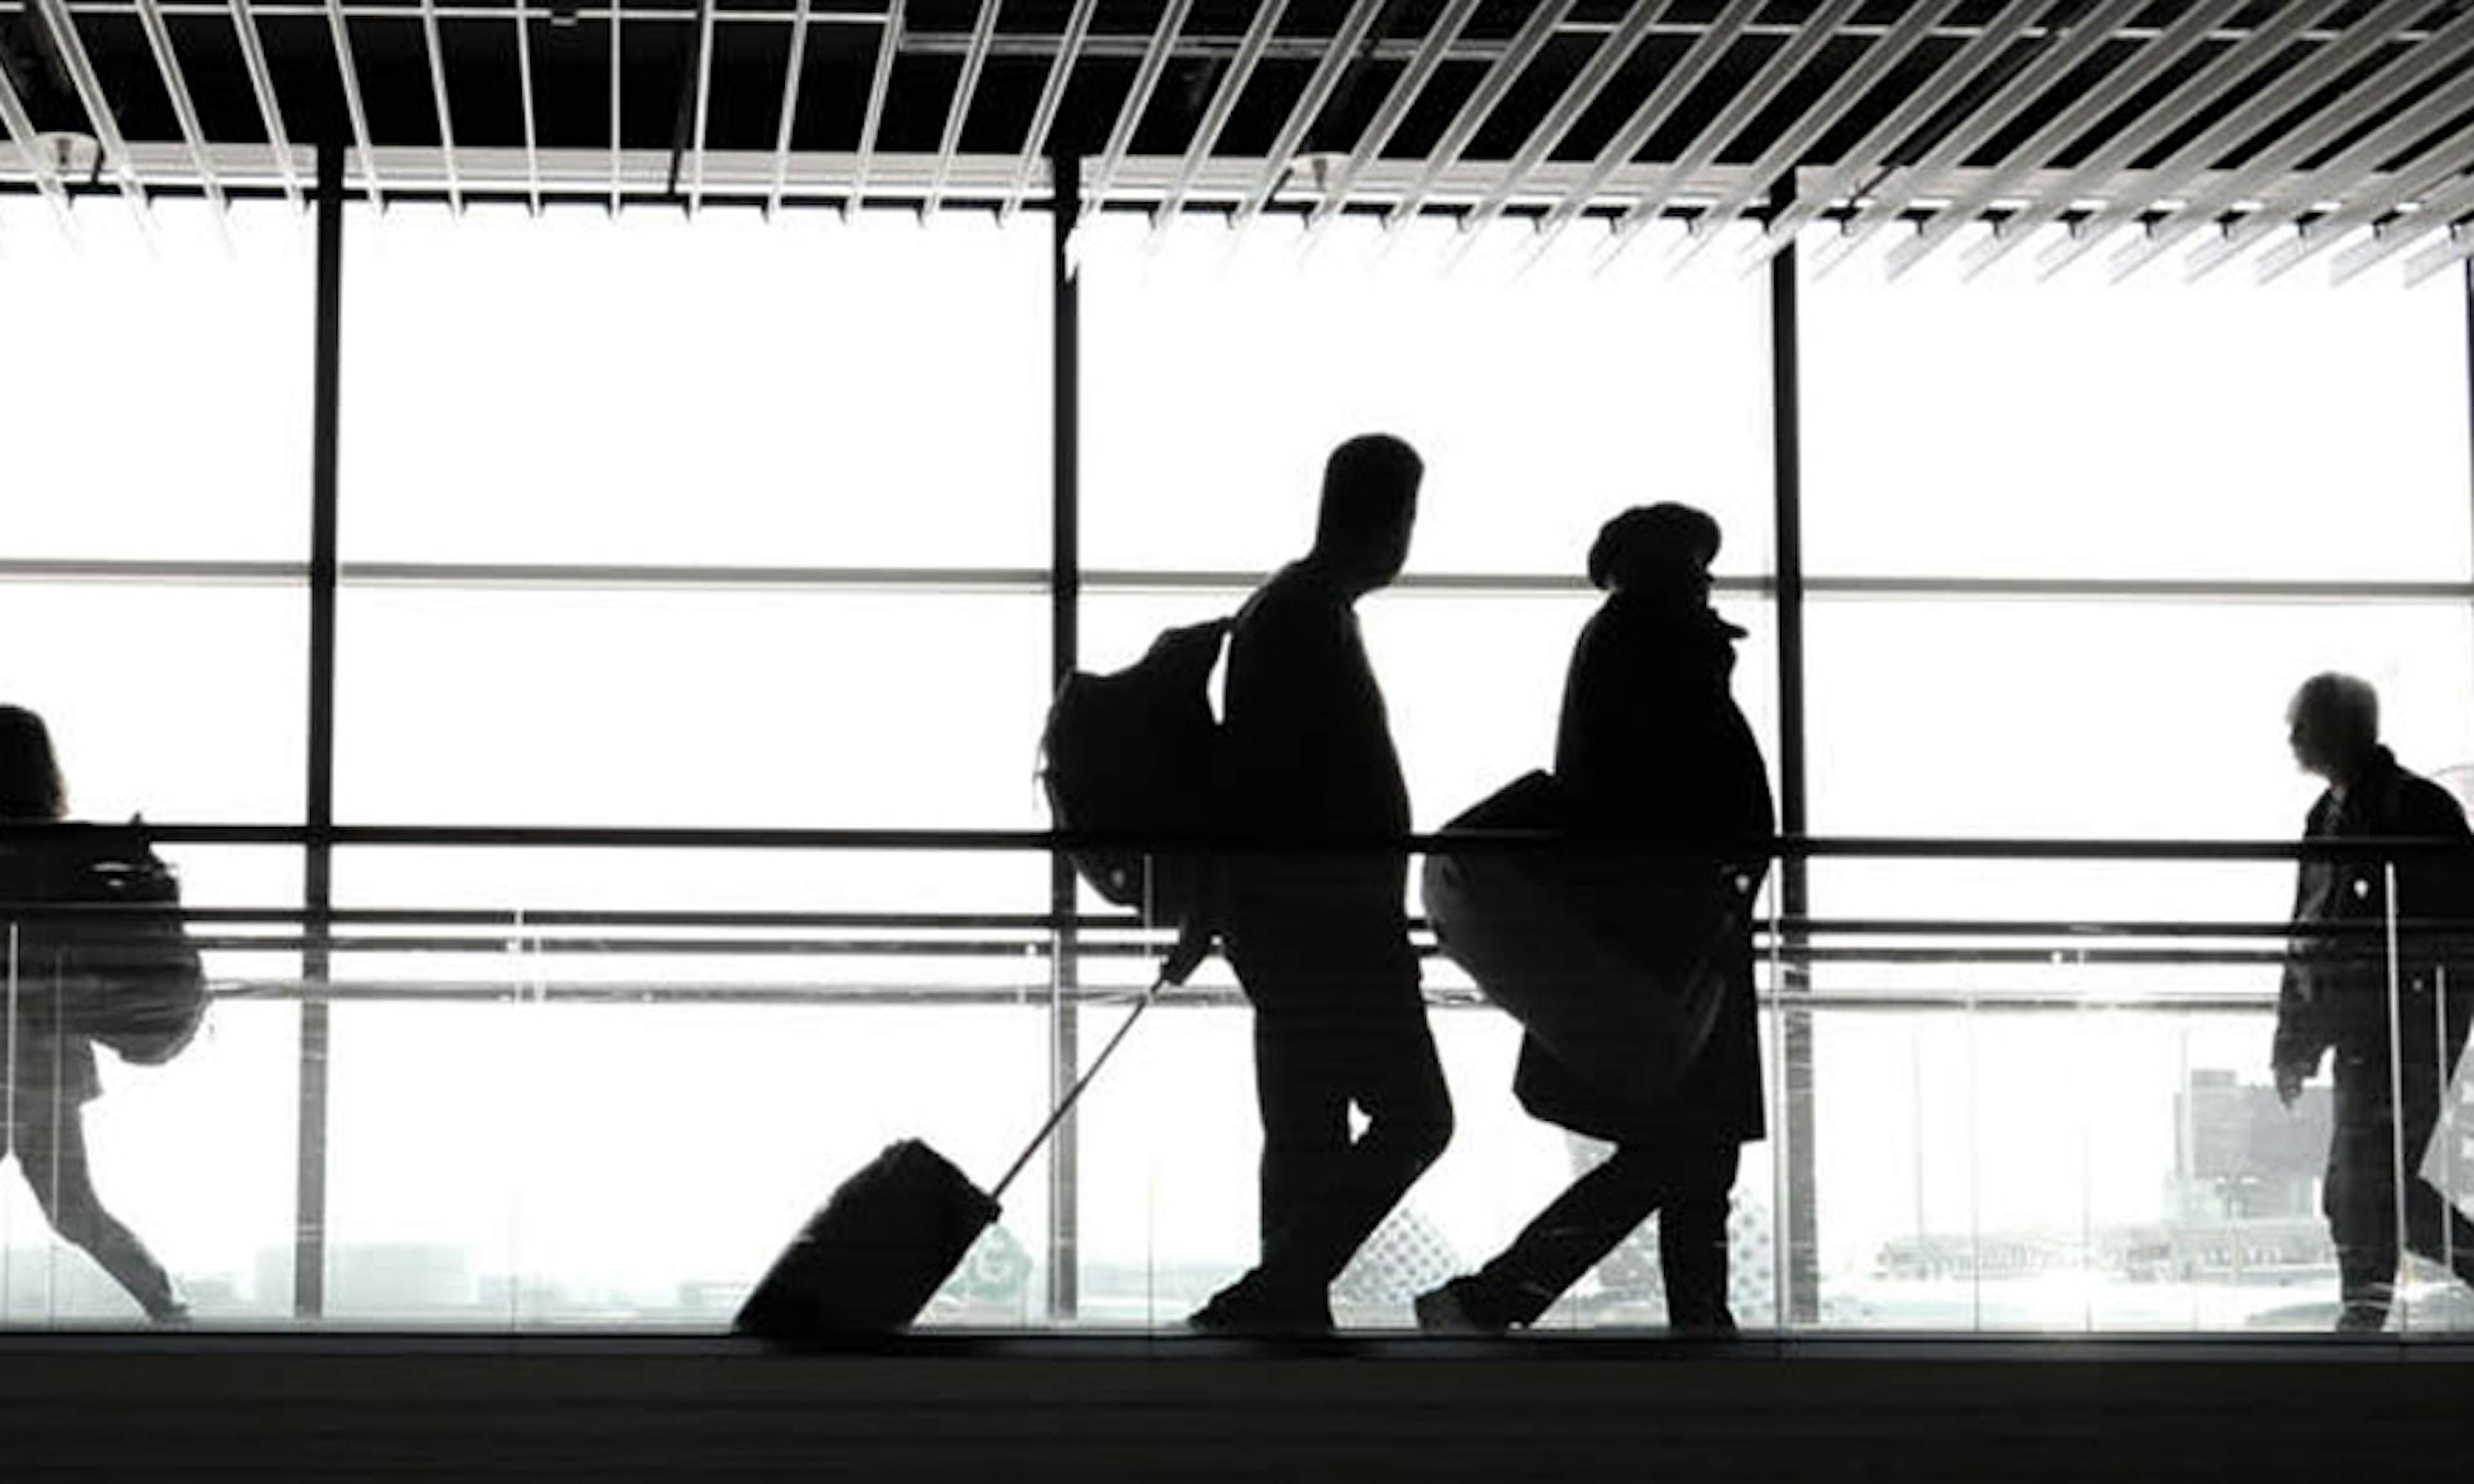 Silhouettes of people walking in an airport